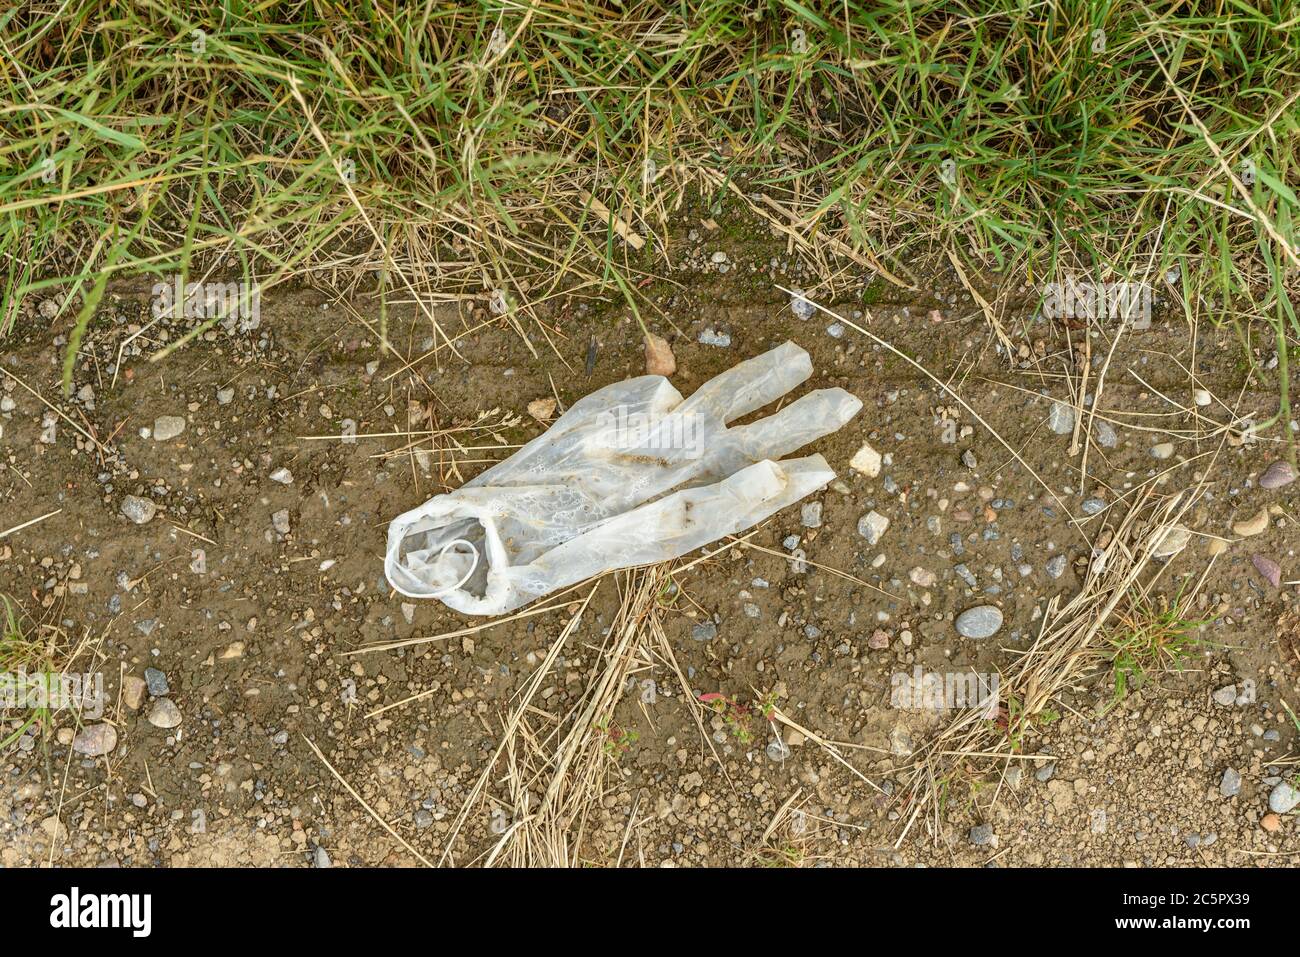 Protective glove thrown in nature at the edge of a walking path Stock Photo